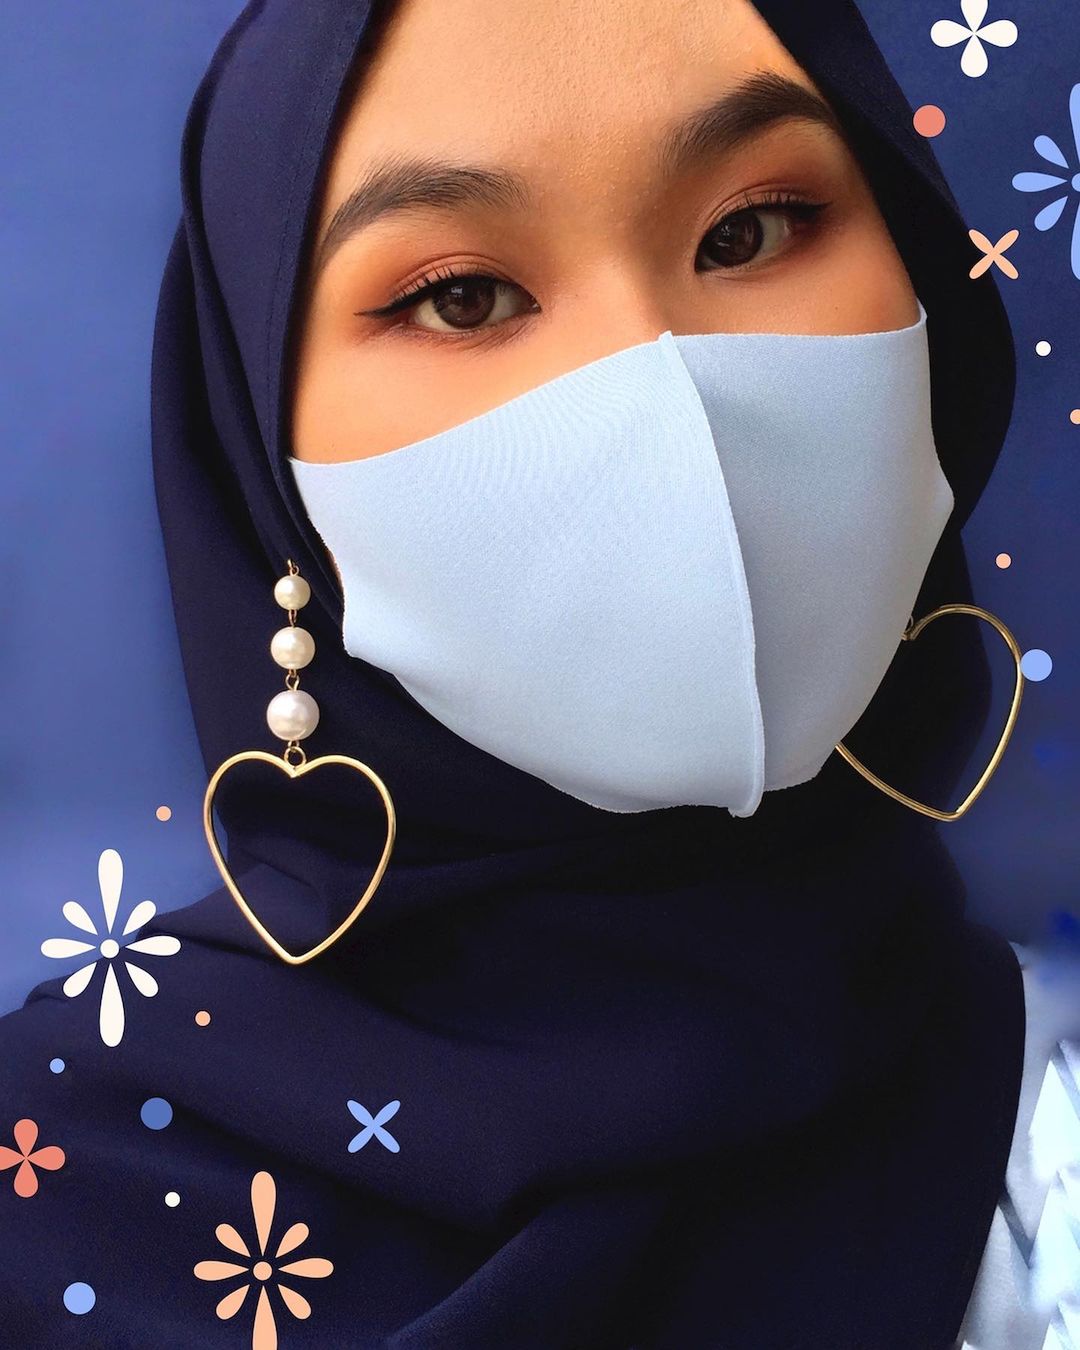 This Malaysian Creates Elegant Earrings For Hijabis To Style With Their